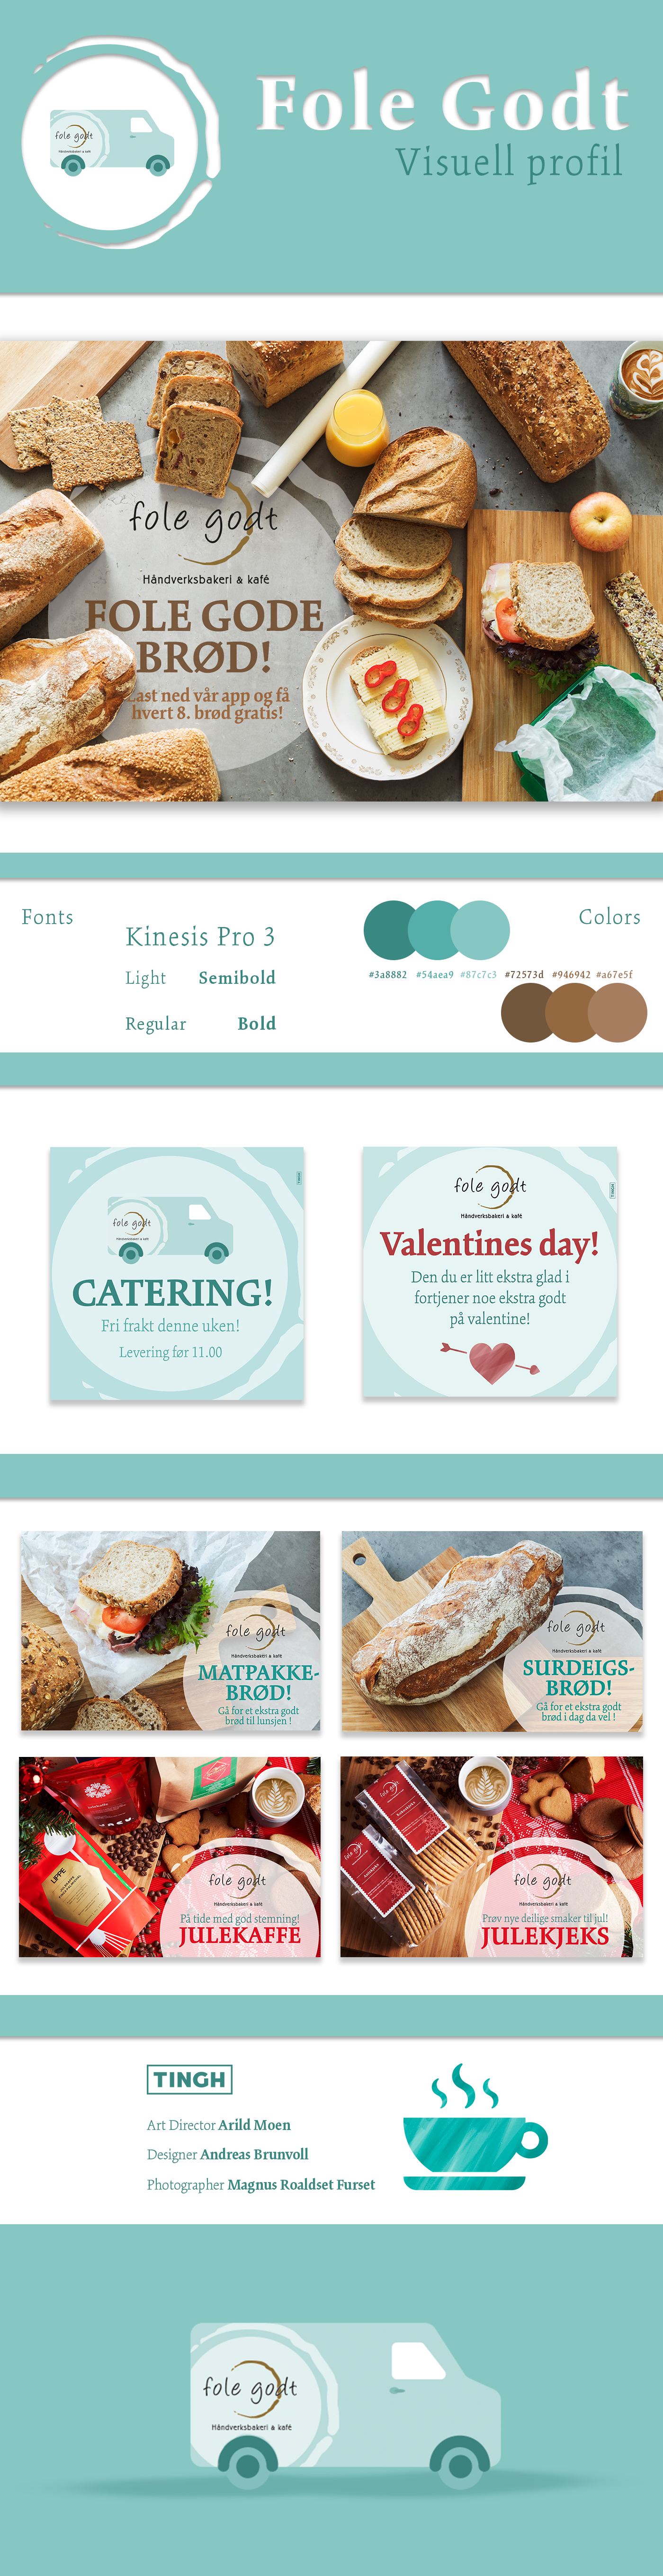 bakery ILLUSTRATION  catering Photography  bread tingh norway molde design Food 